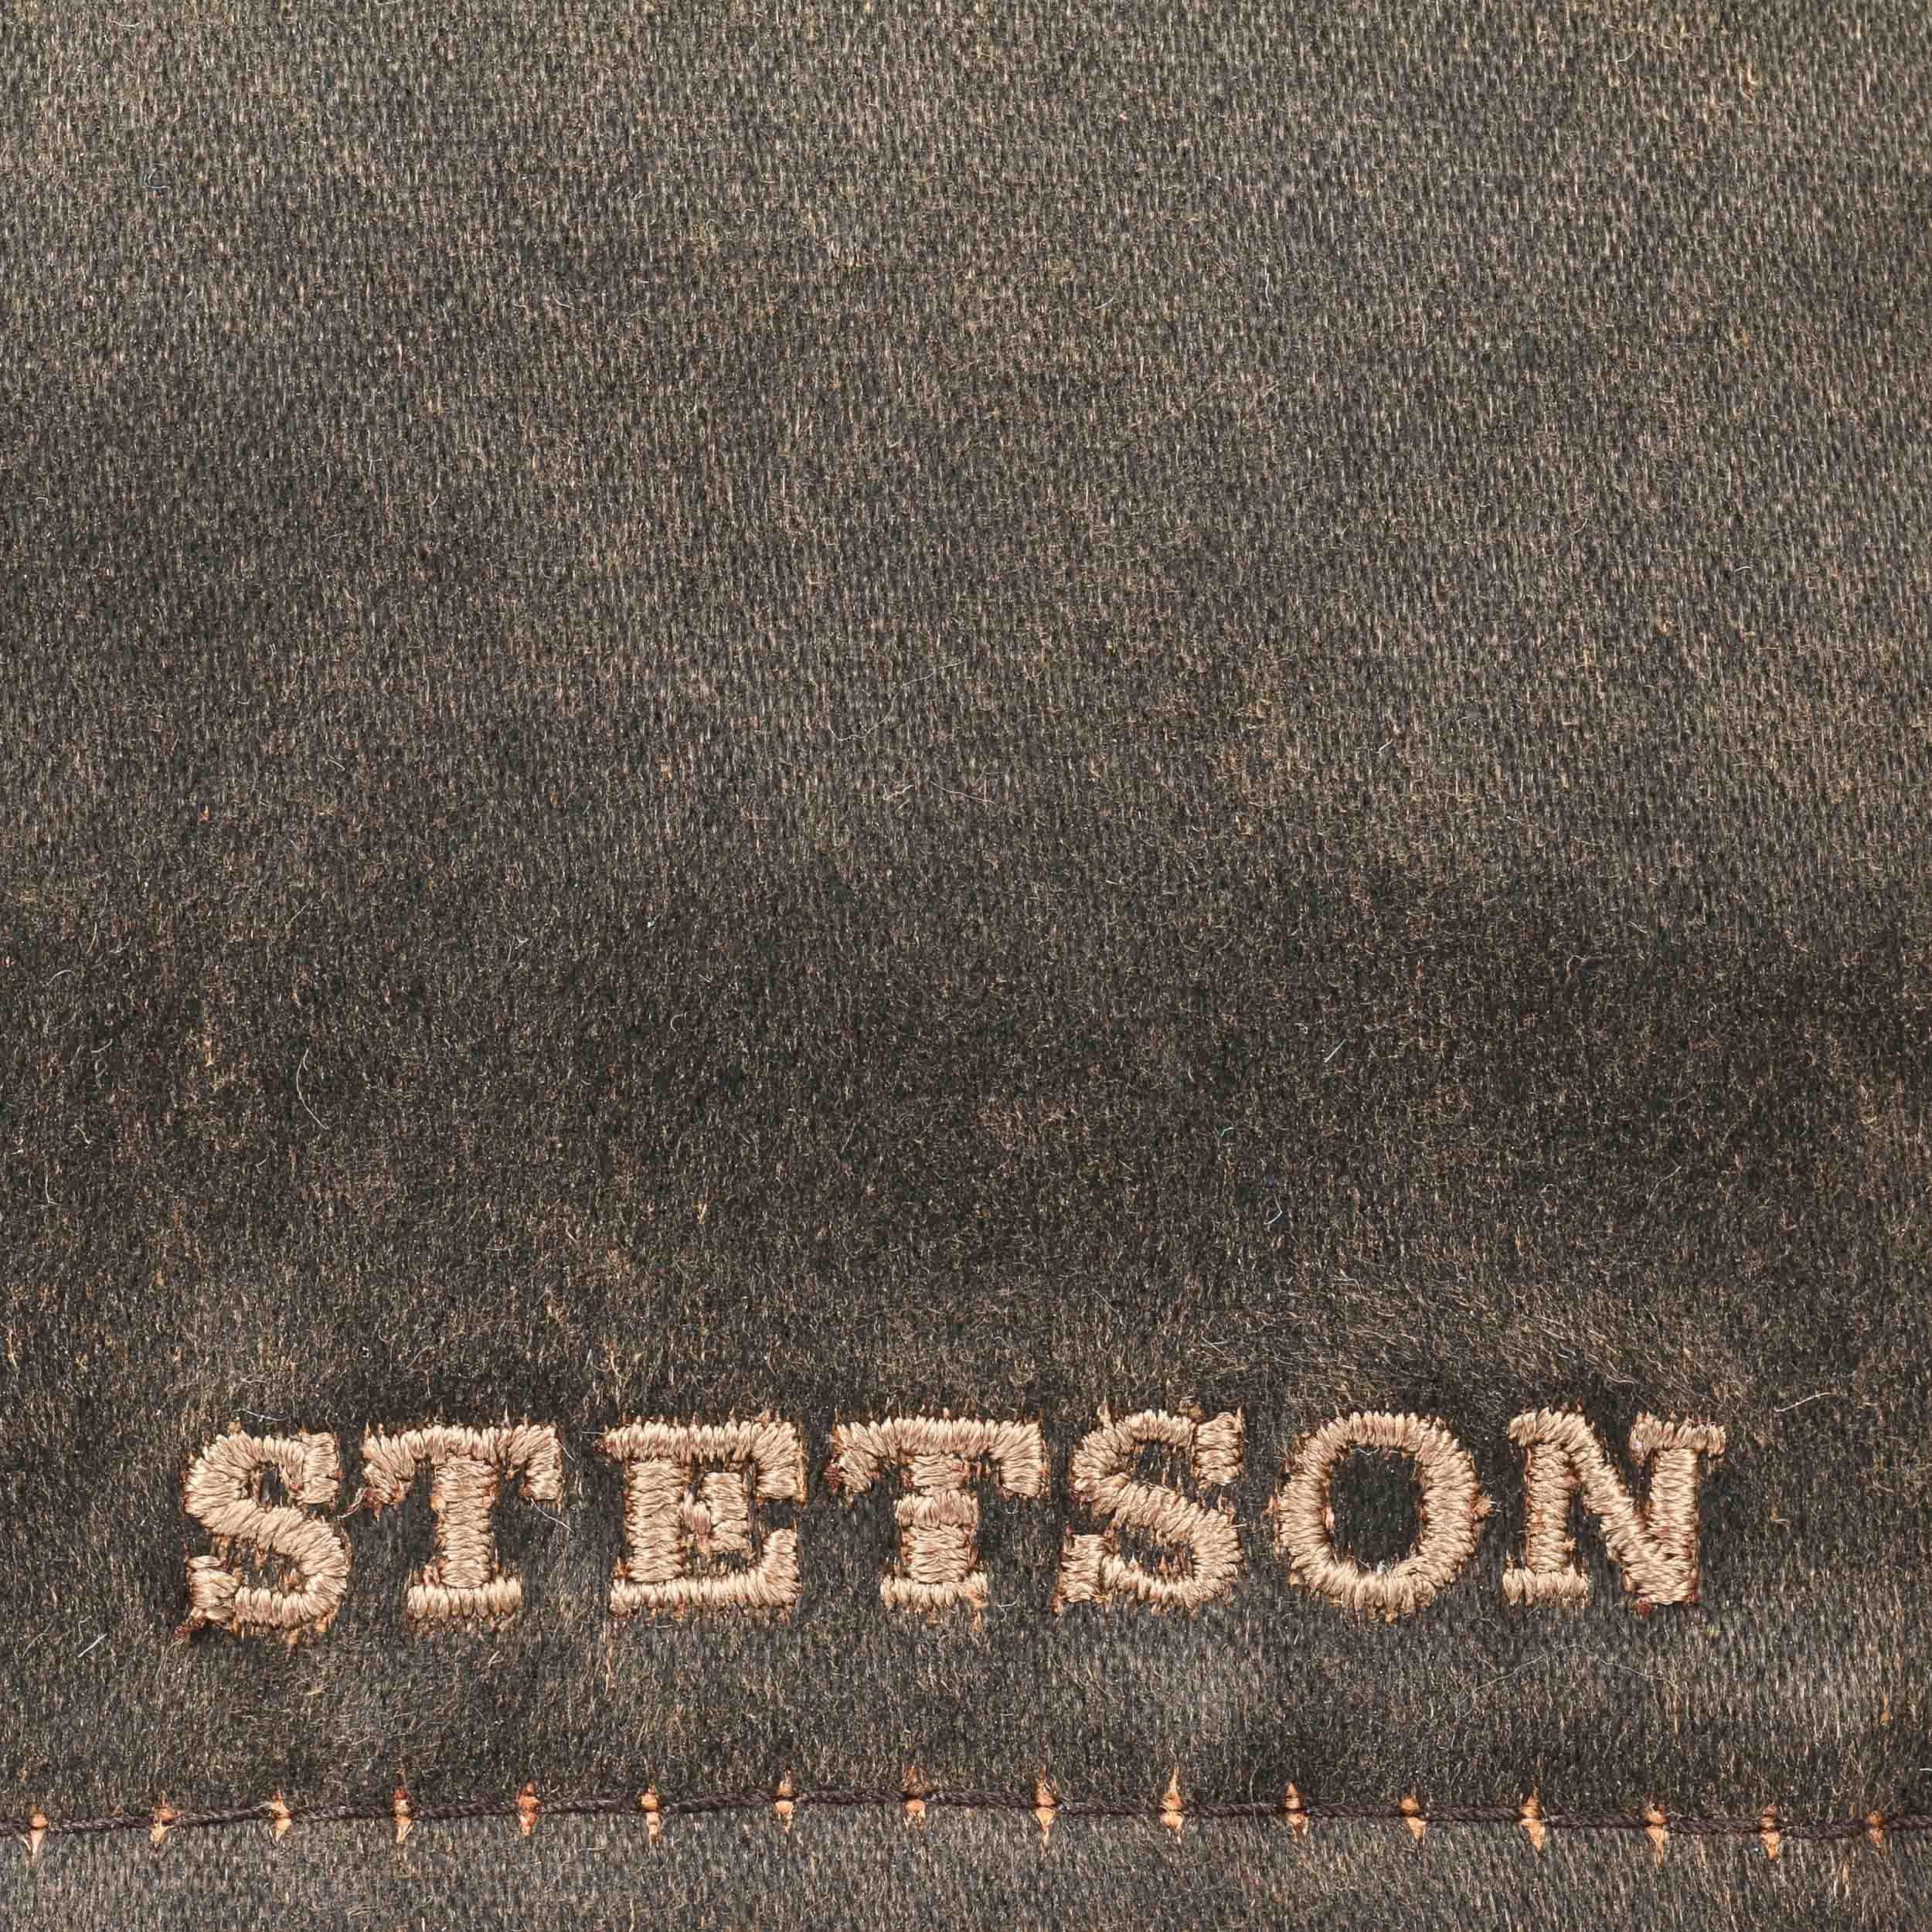 Level Gatsby Cap by Stetson - 59,00